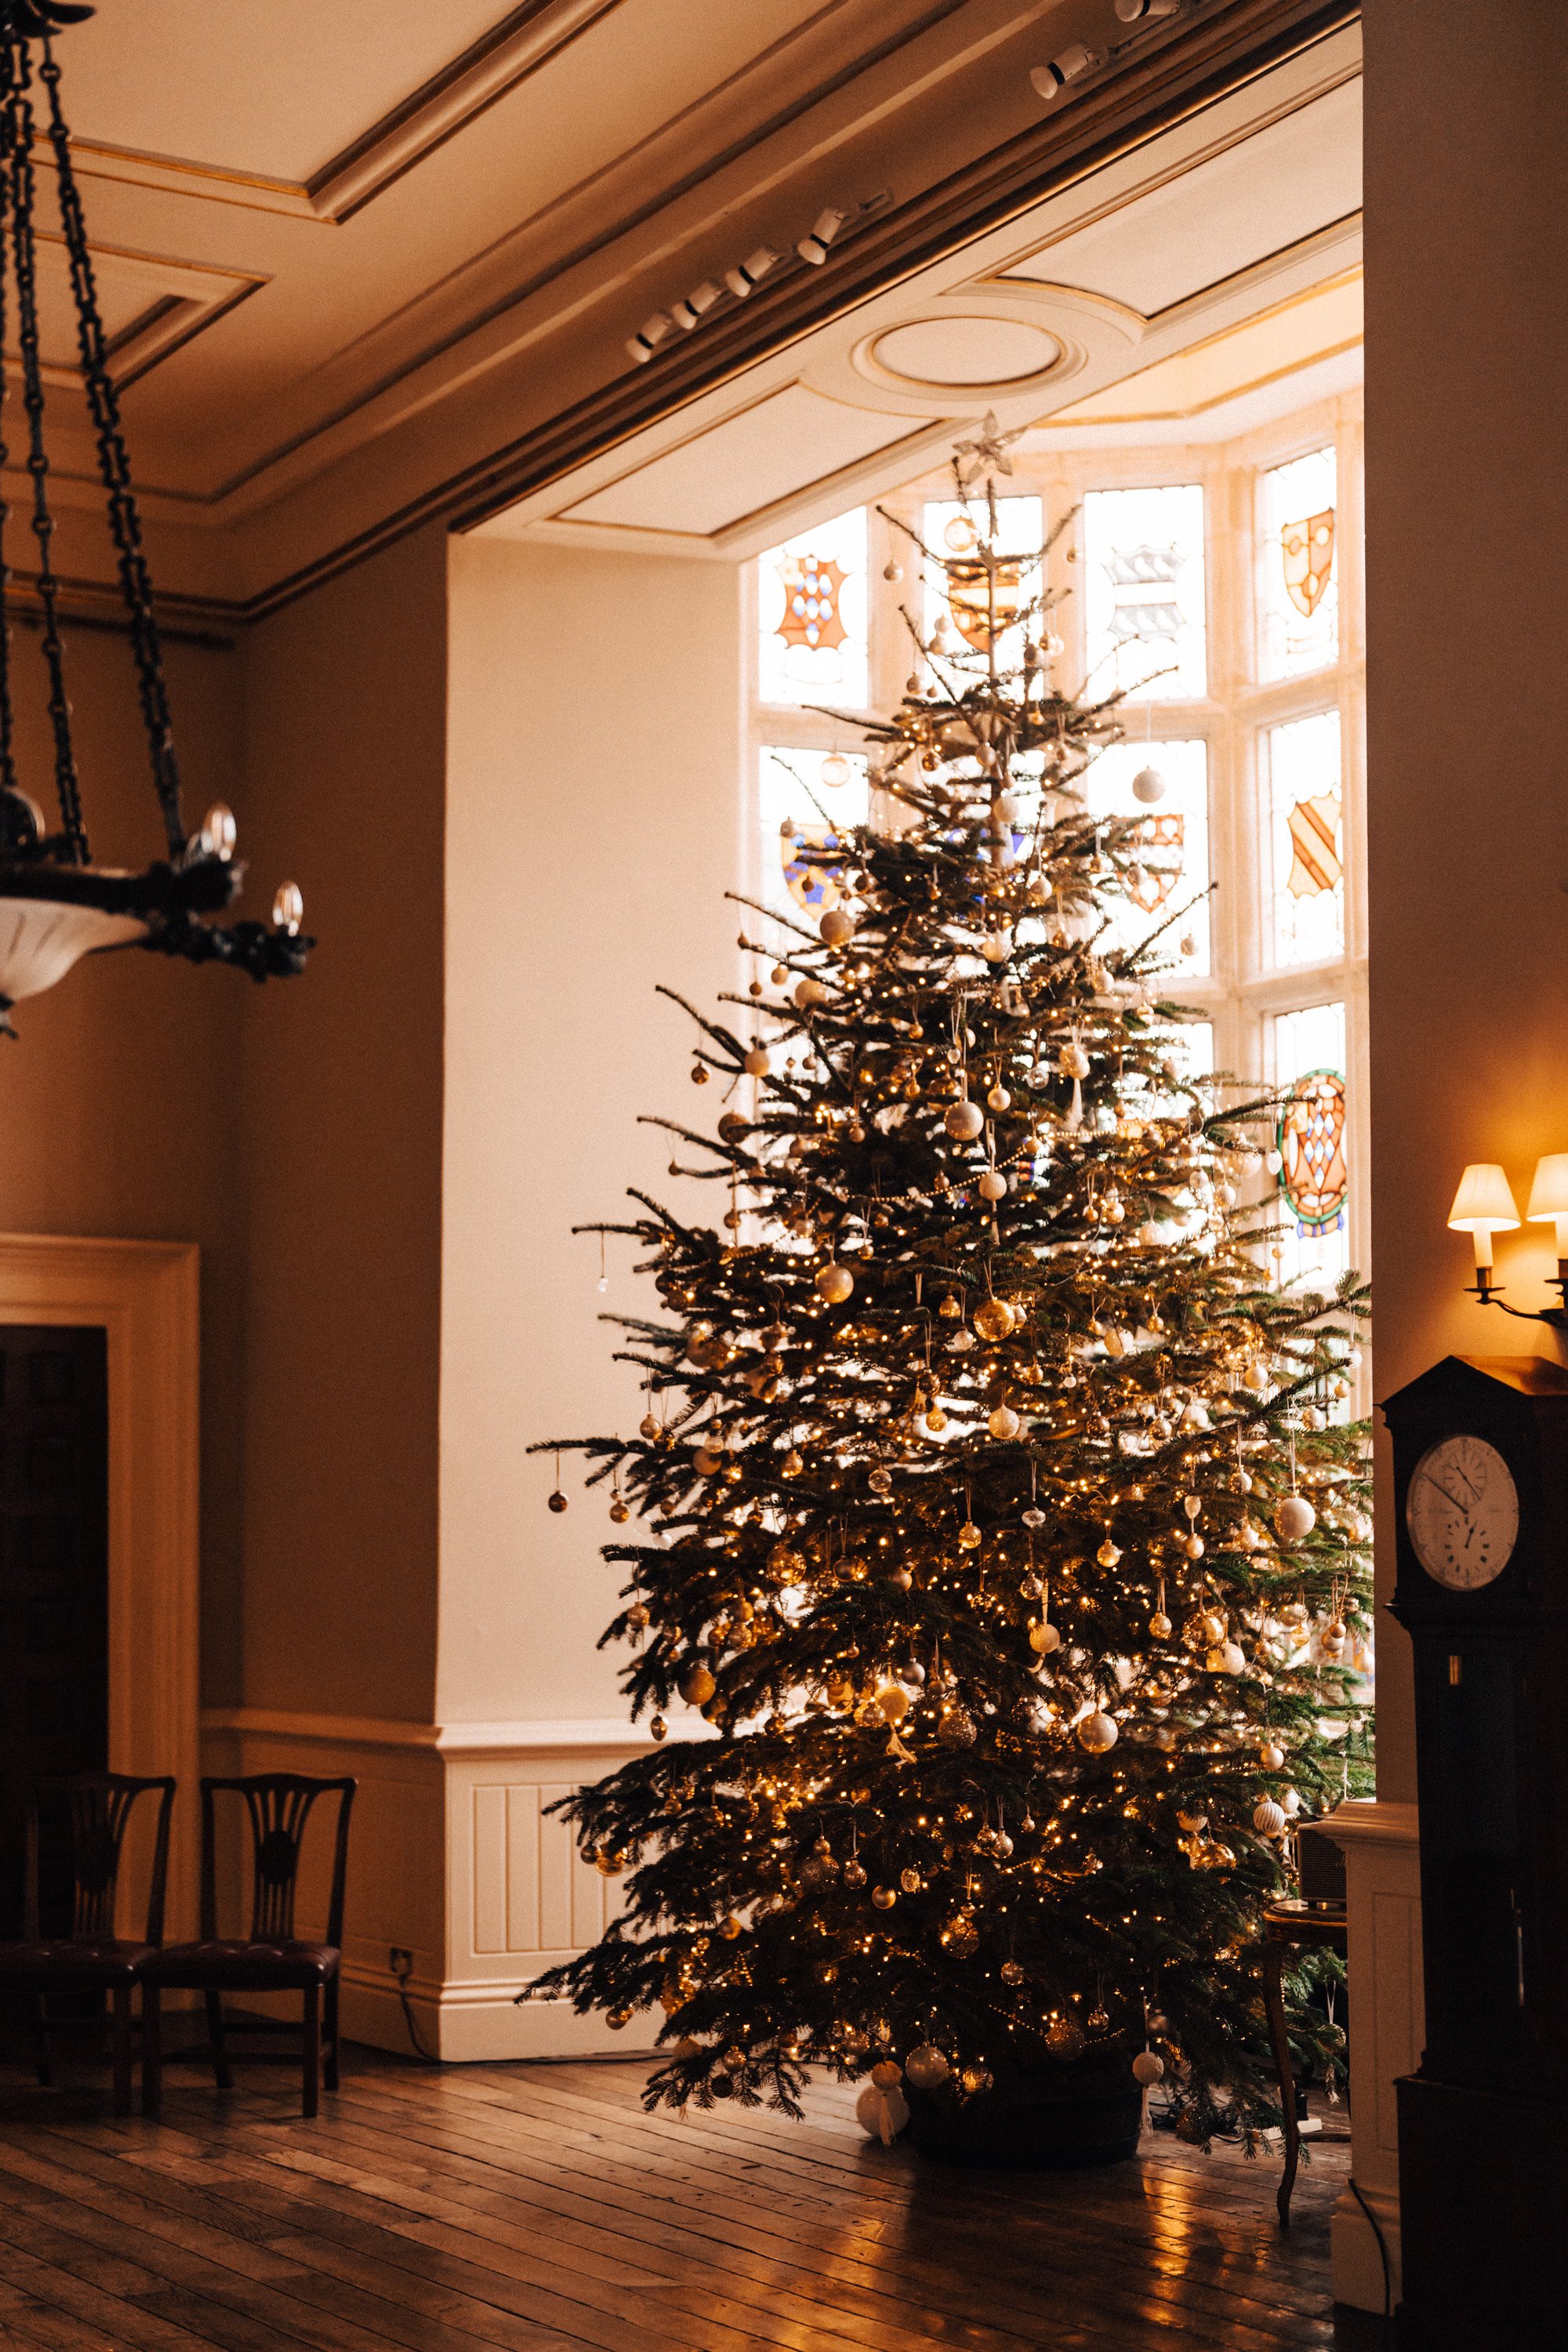 Huge christmas tree in mullion windows of old stately home wedding venue for a winter wedding ceremony